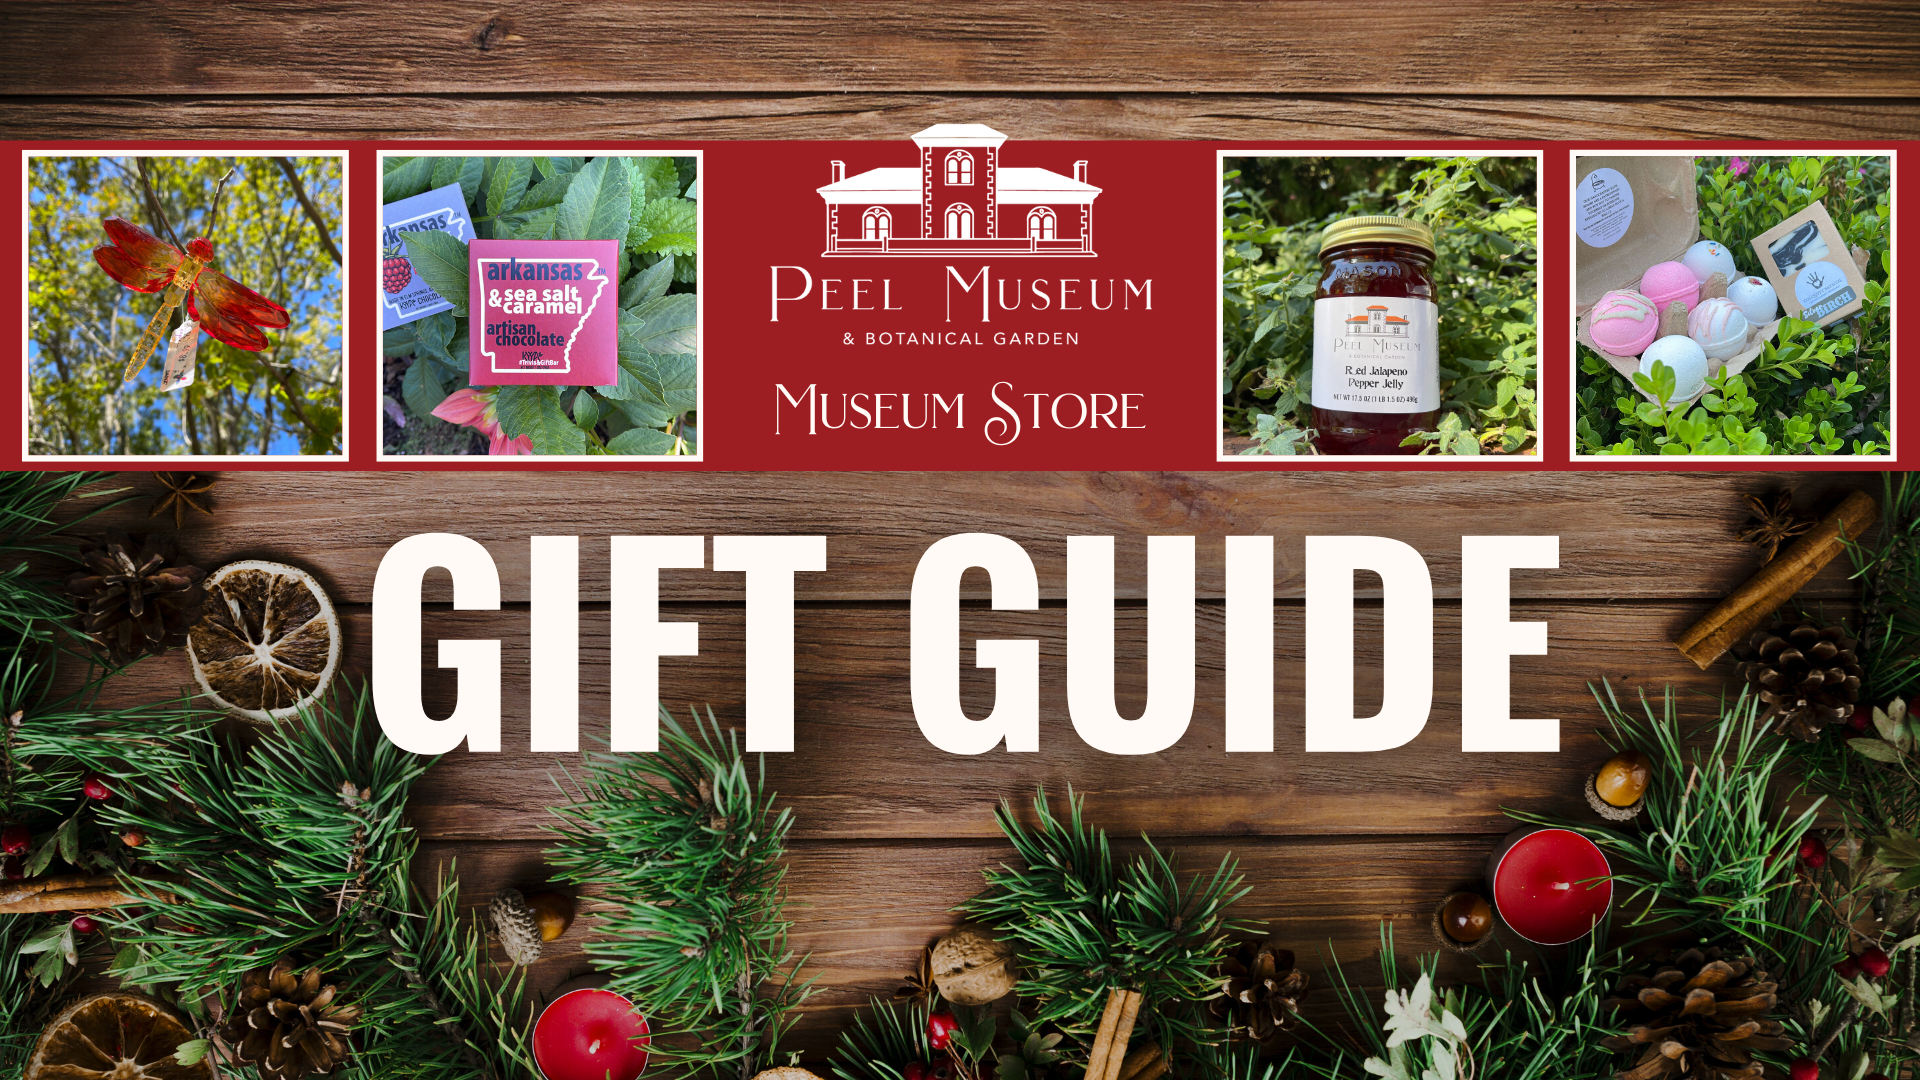 The words "Peel Museum - Museum Store Gift Guide" in white on a rustic, wooden, Christmas background. Red ribbon with pictures of museum store items (chocolate, jam, dragonfly yard ornament, and bath bombs).